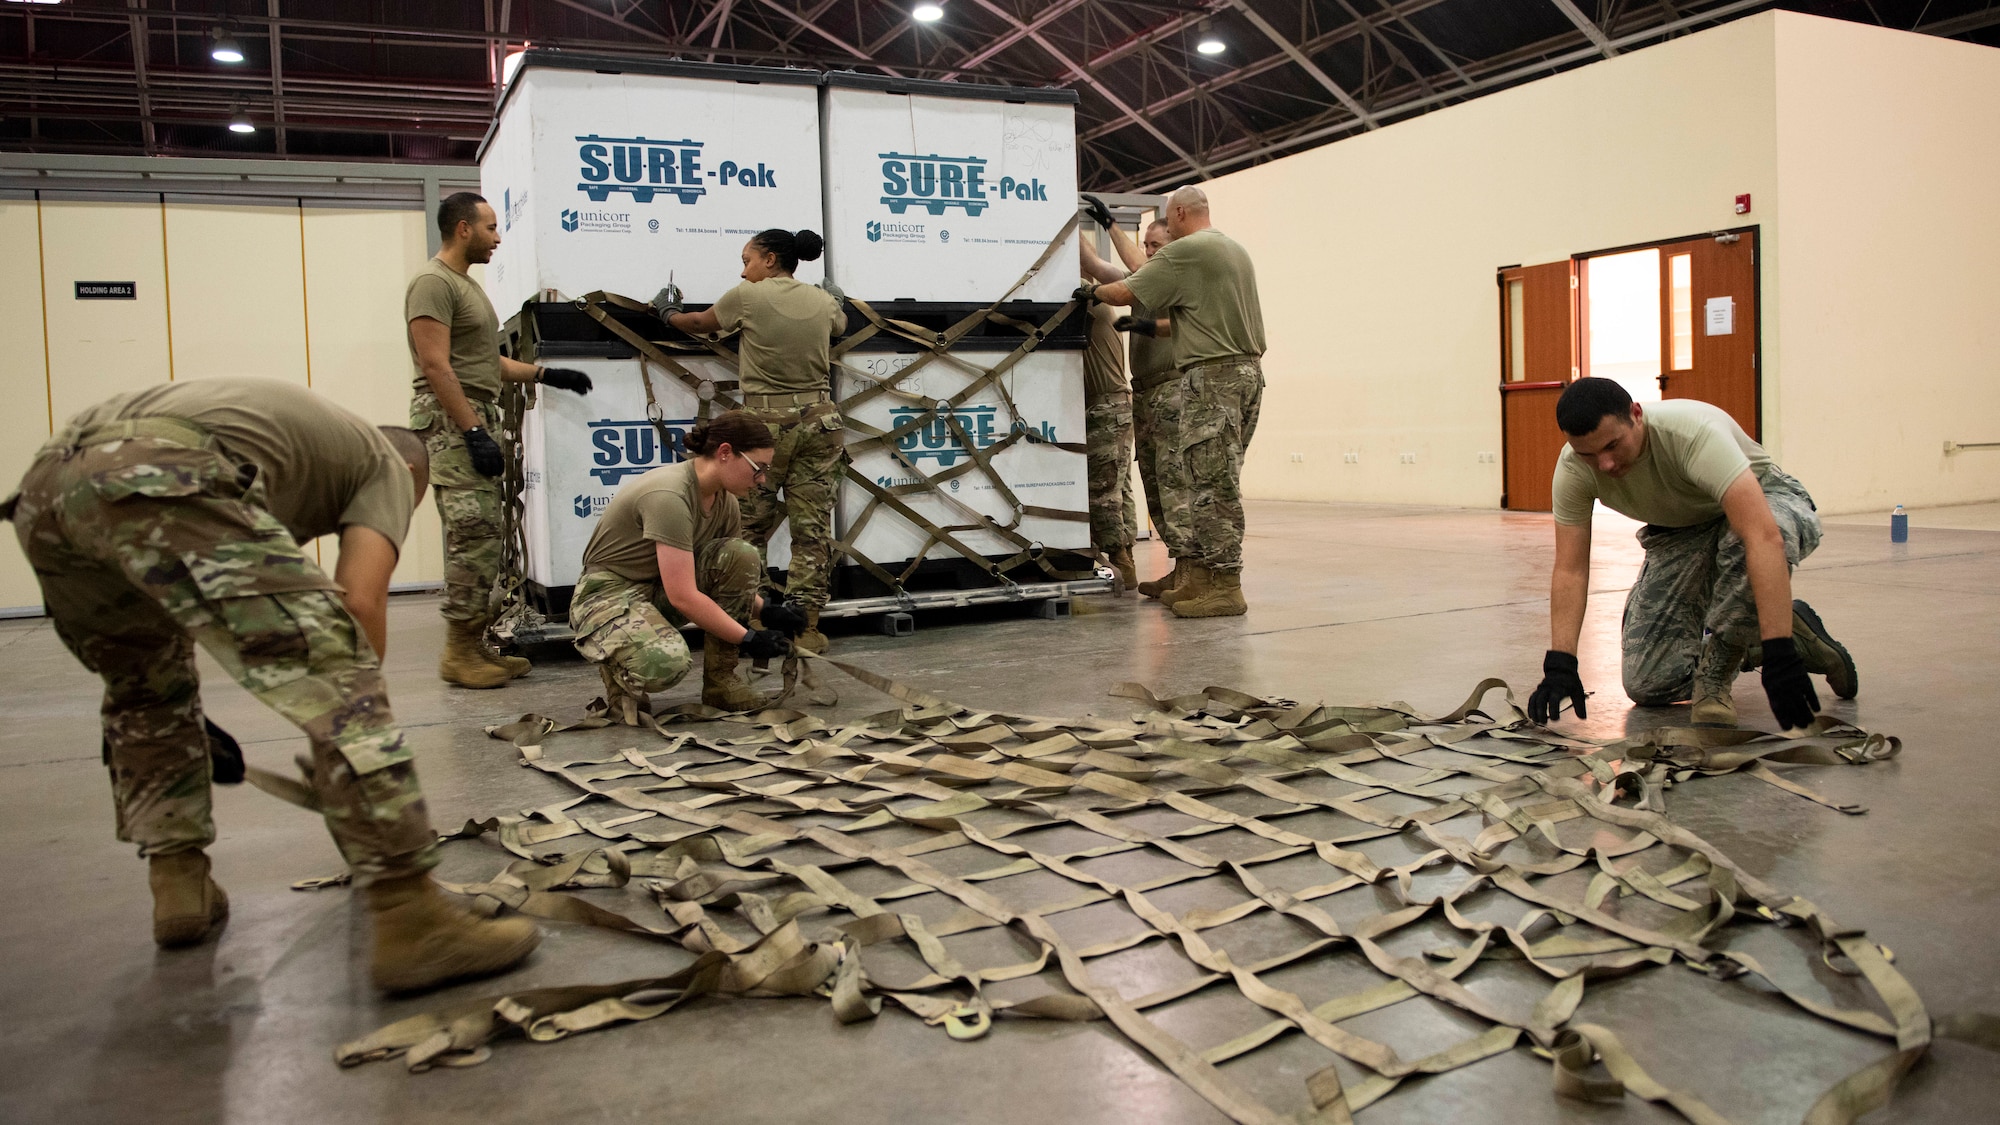 Airmen prep a cargo net on the floor of a warehouse before putting it onto a aircraft sized cargo pallet at Incirlik Air Base.